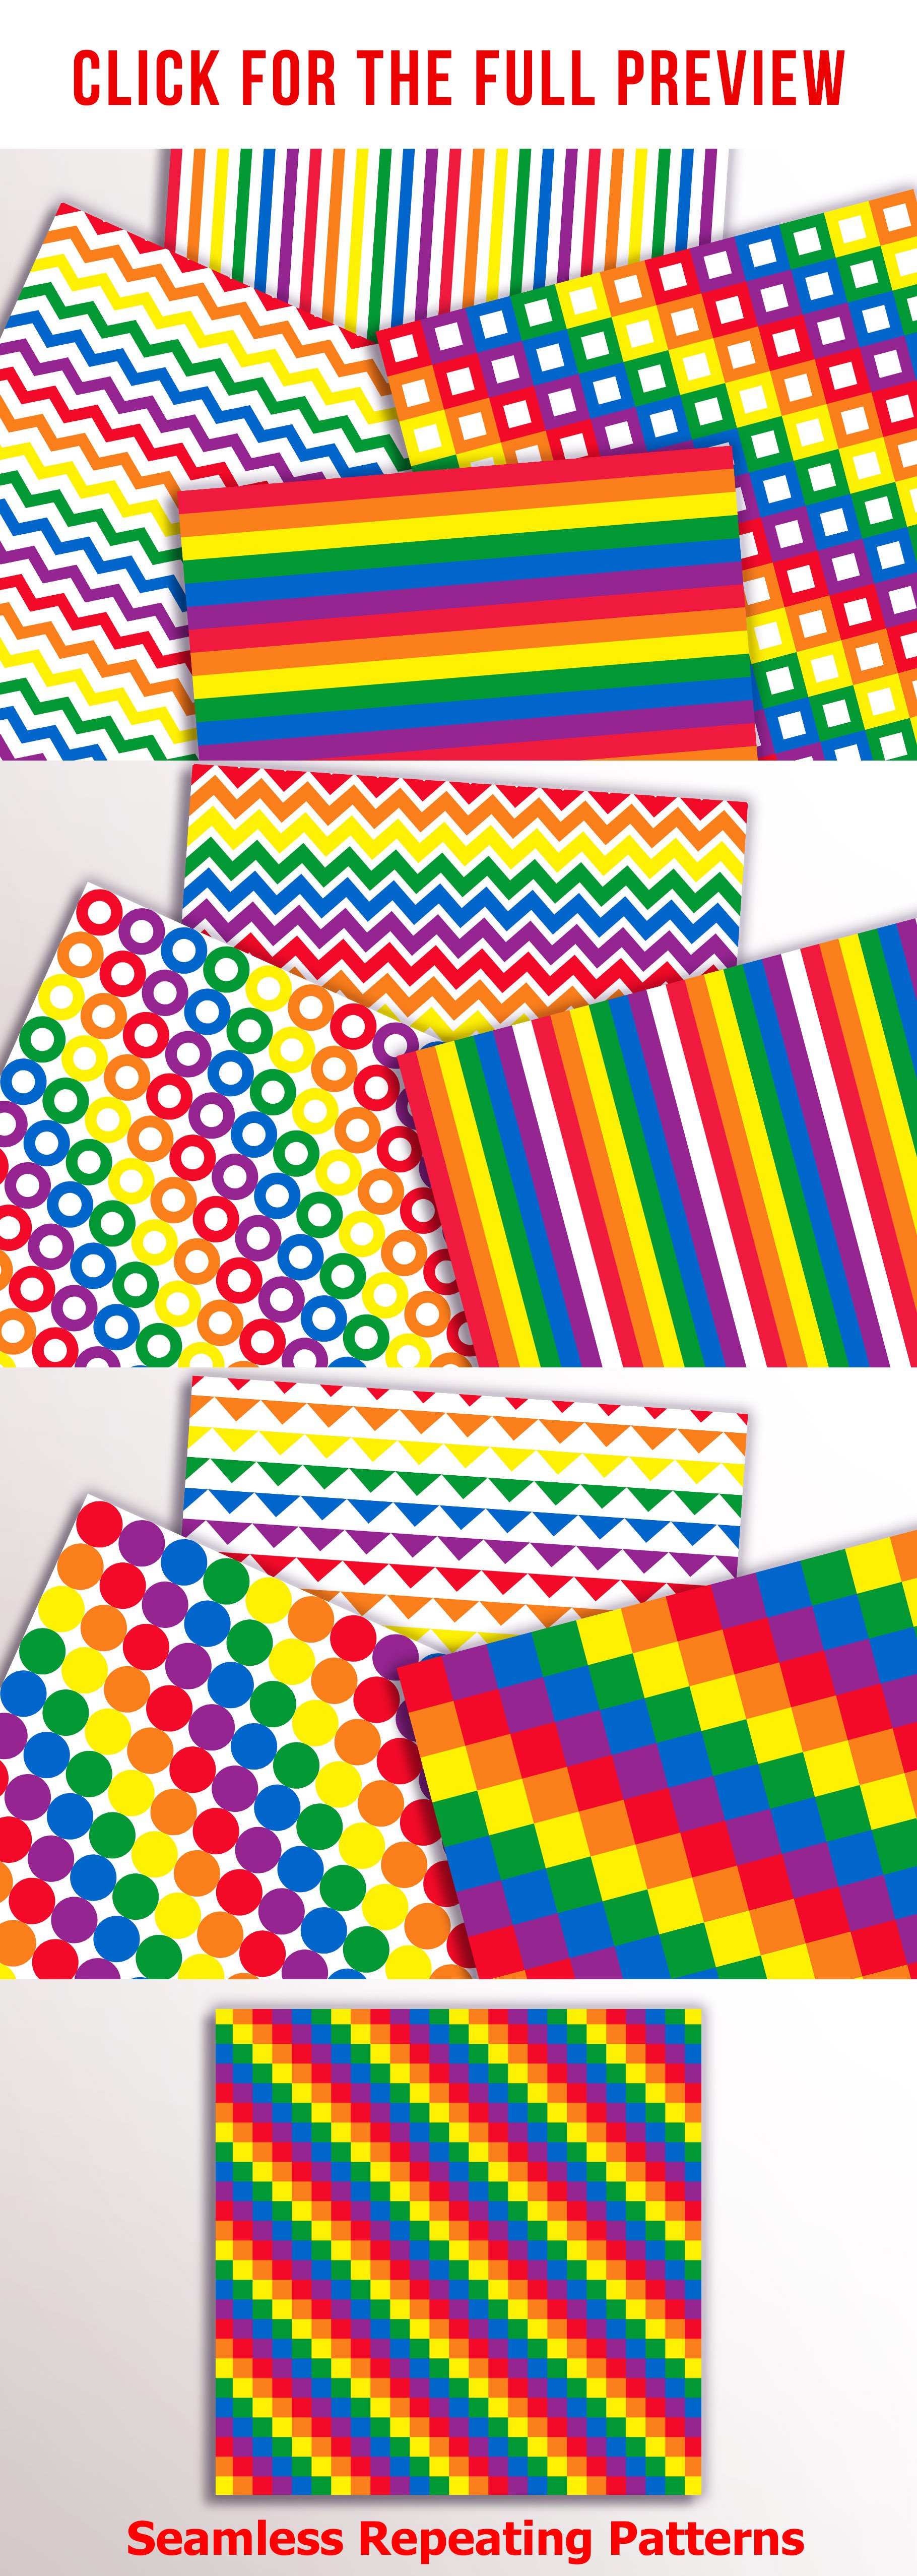 Rainbow Digital Papers preview image.